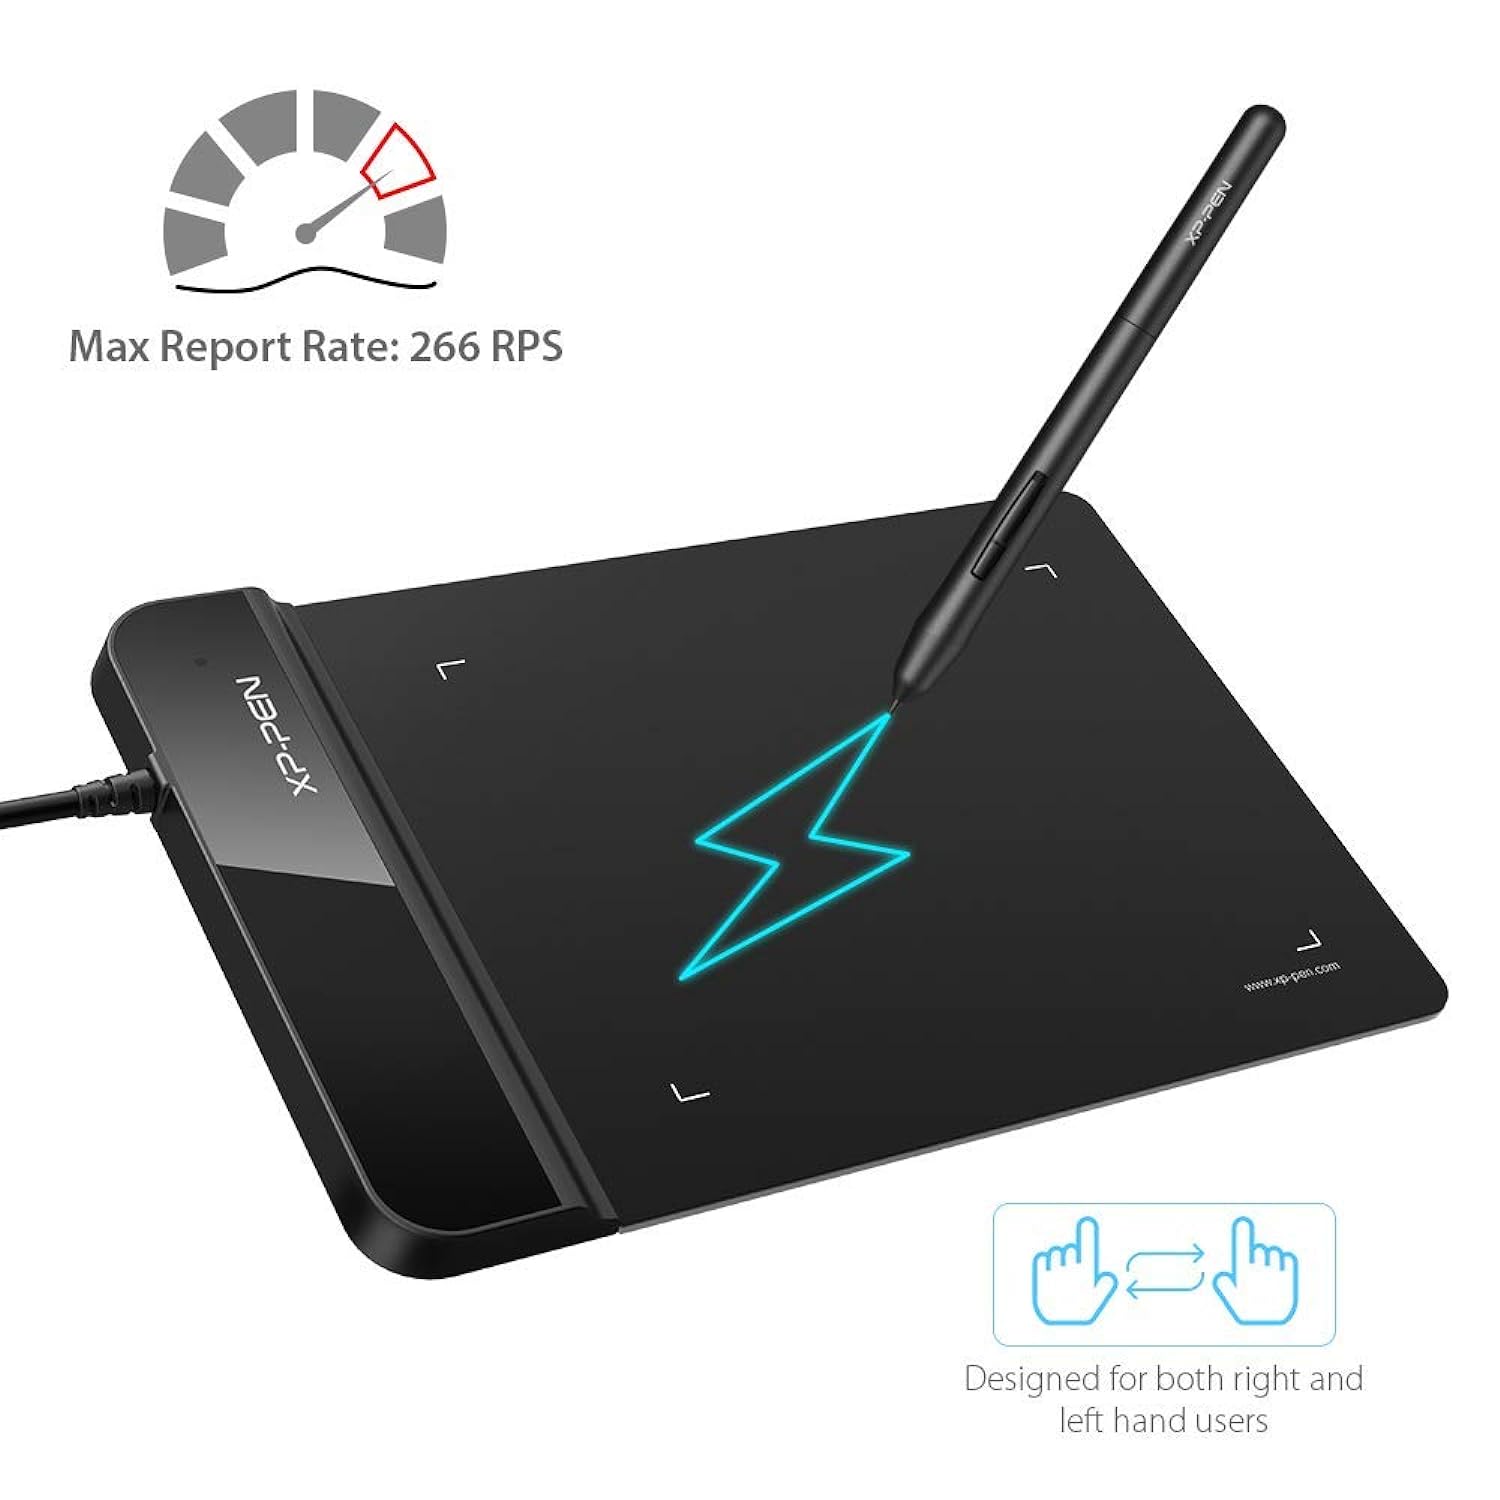 Great Choice Products Drawing Tablet Xppen G430S Osu Tablet Graphic Drawing Tablet With 8192 Levels Pressure Battery-Free Stylus, 4 X 3 Inch Ultrat…